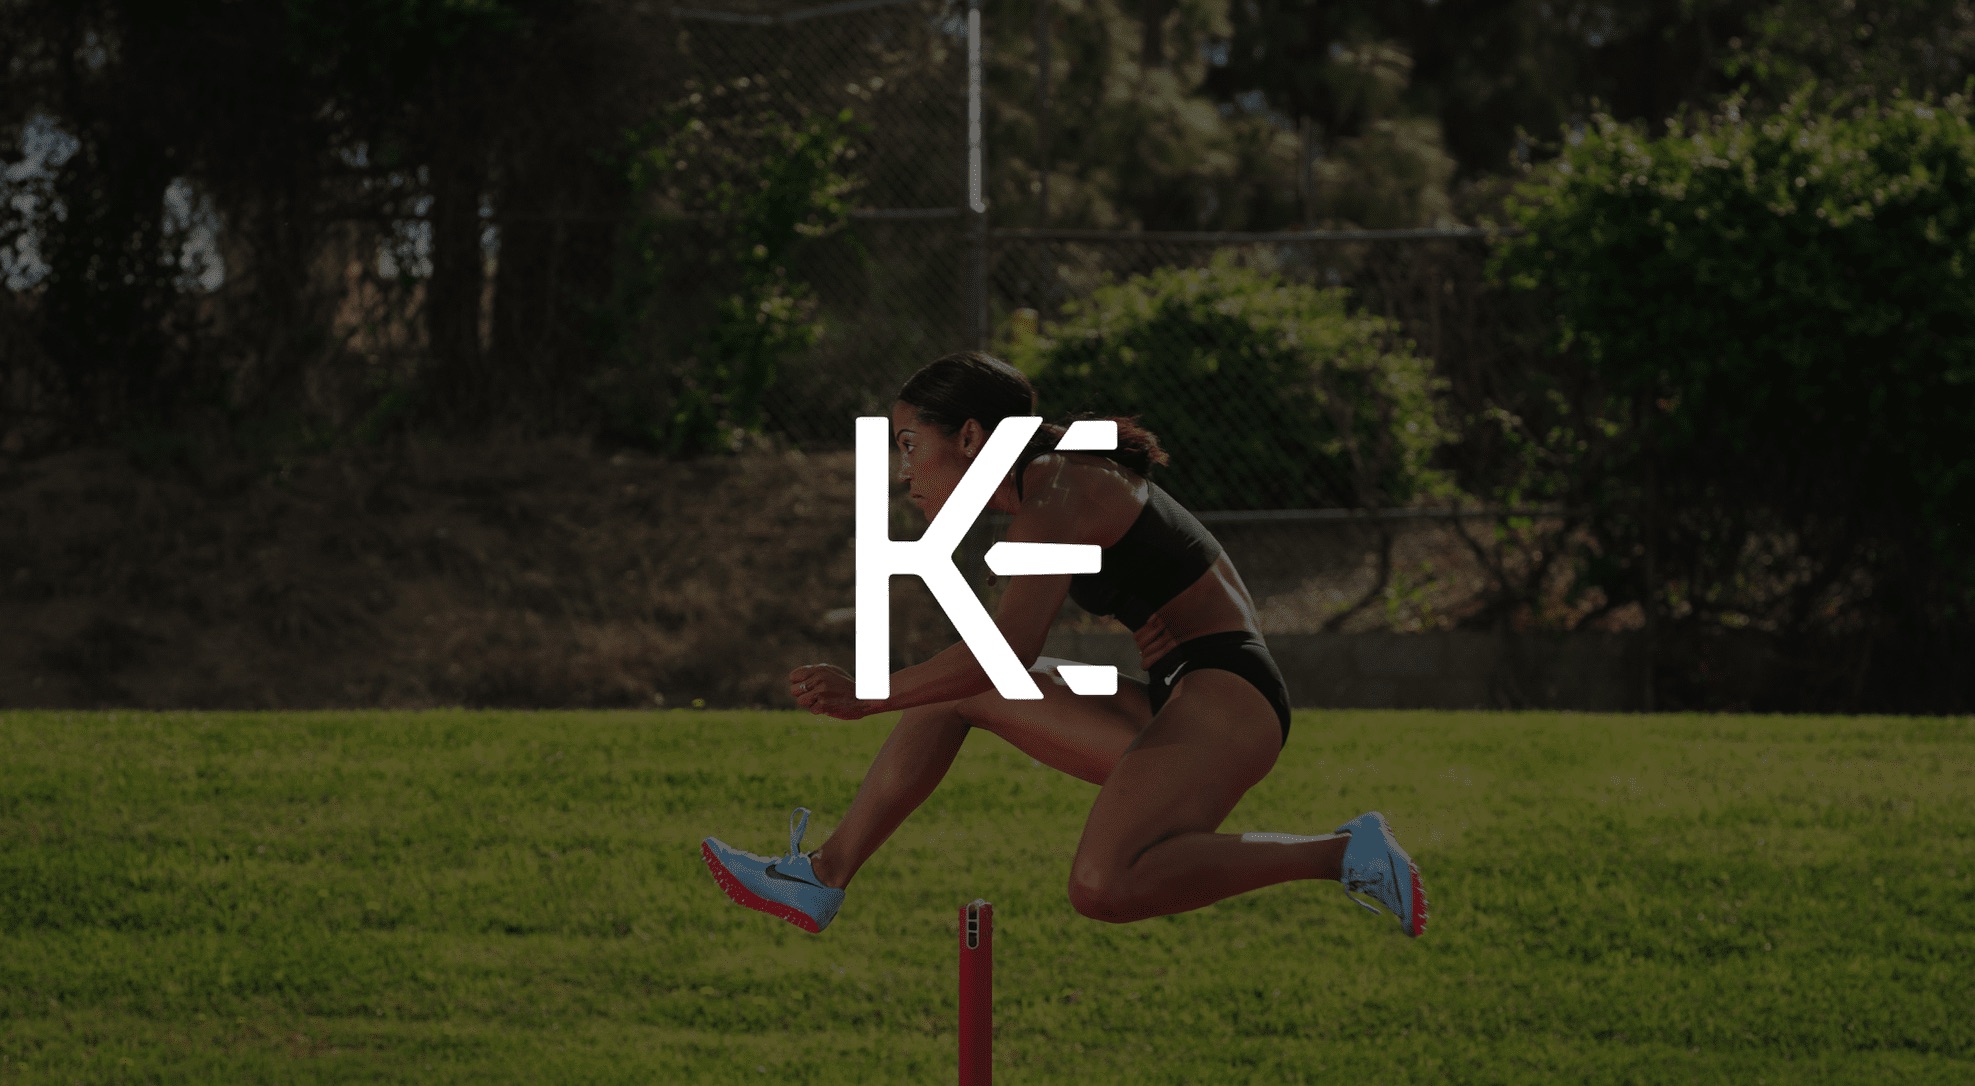 IU C&I Studios Page Professional Photography Services by C&I Studios White KE logo against a dimmed background side view of a female track athlete jumping a hurdle